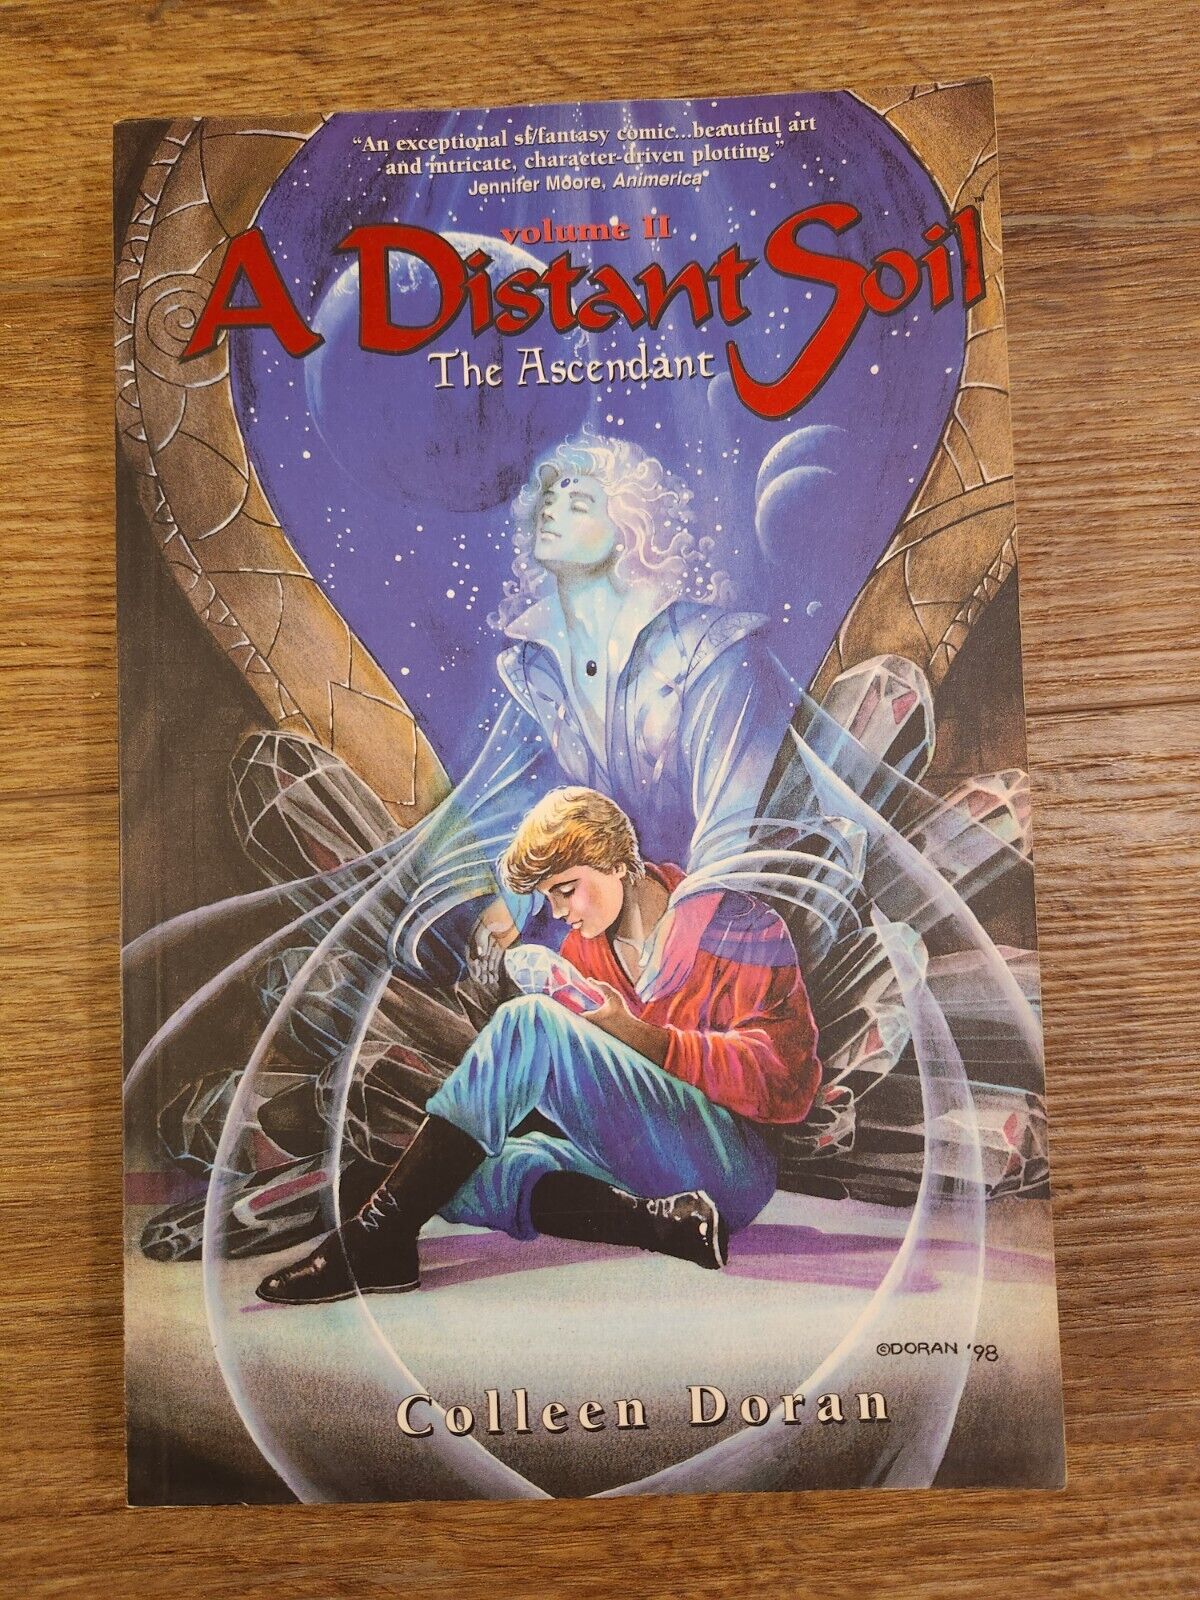 A Distant Soil Volume 2: the Ascendant First Edition by Colleen Doran